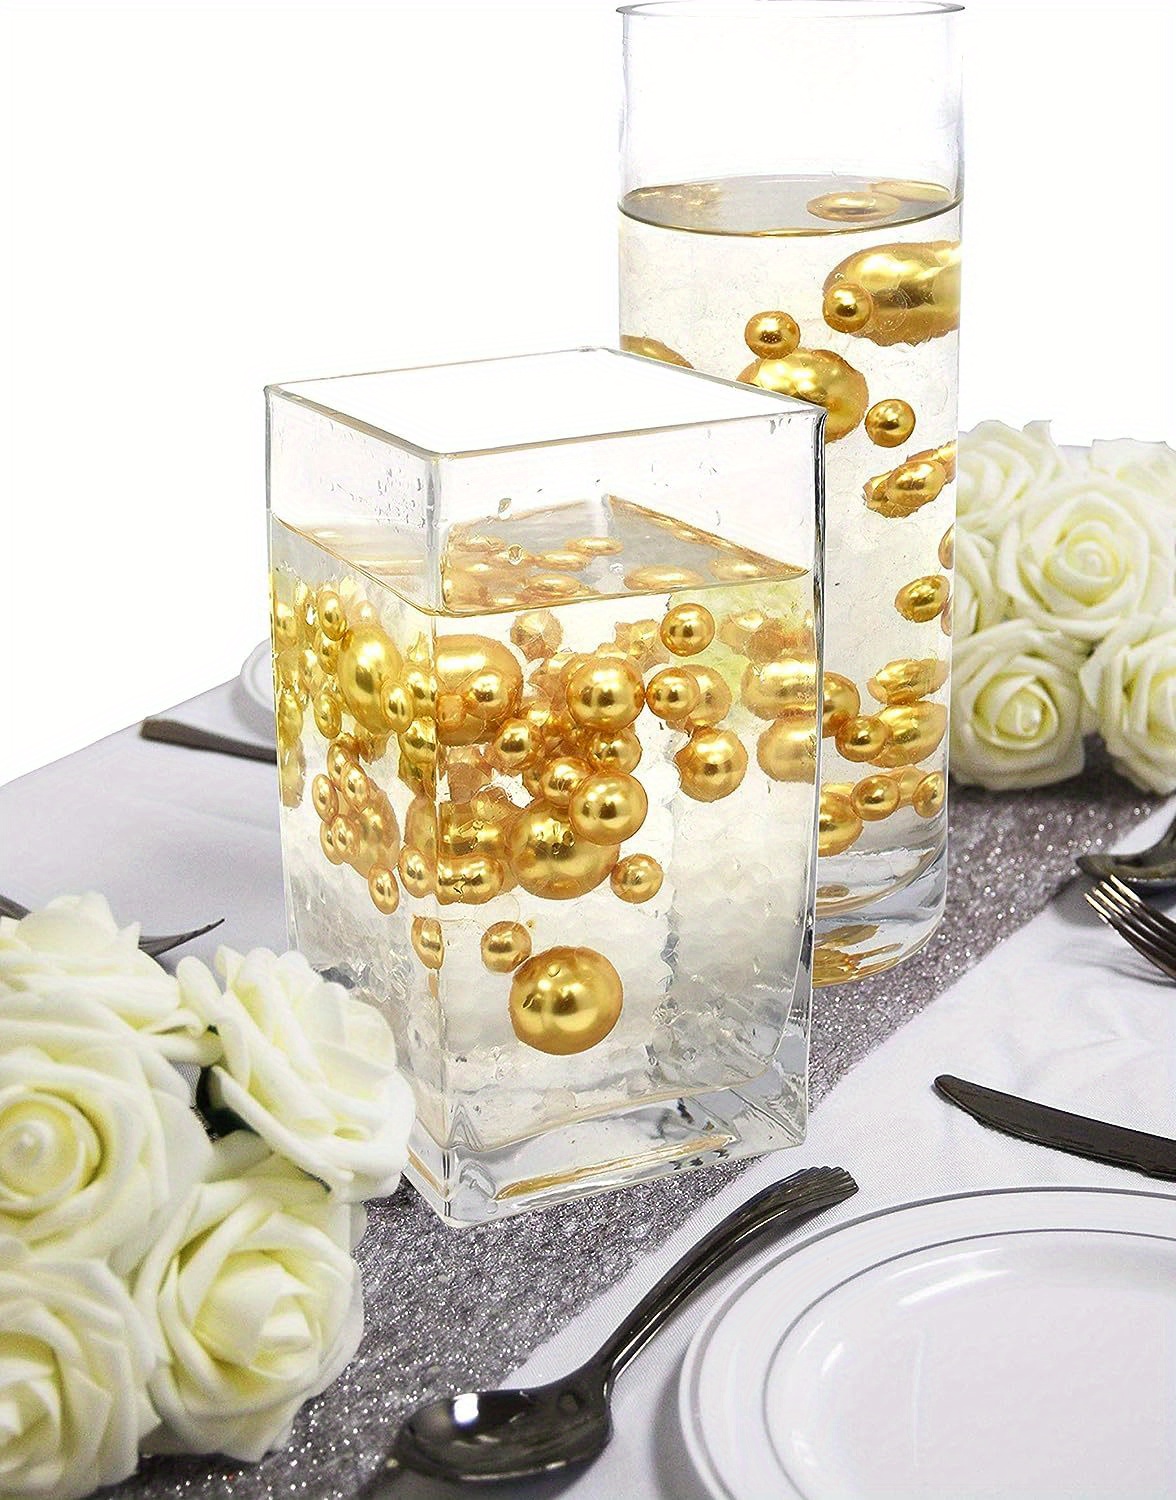 Floating White Pearls - No Hole Jumbo/Assorted Sizes Vase Decorations + Includes Transparent Water Gels for Floating The Pearls